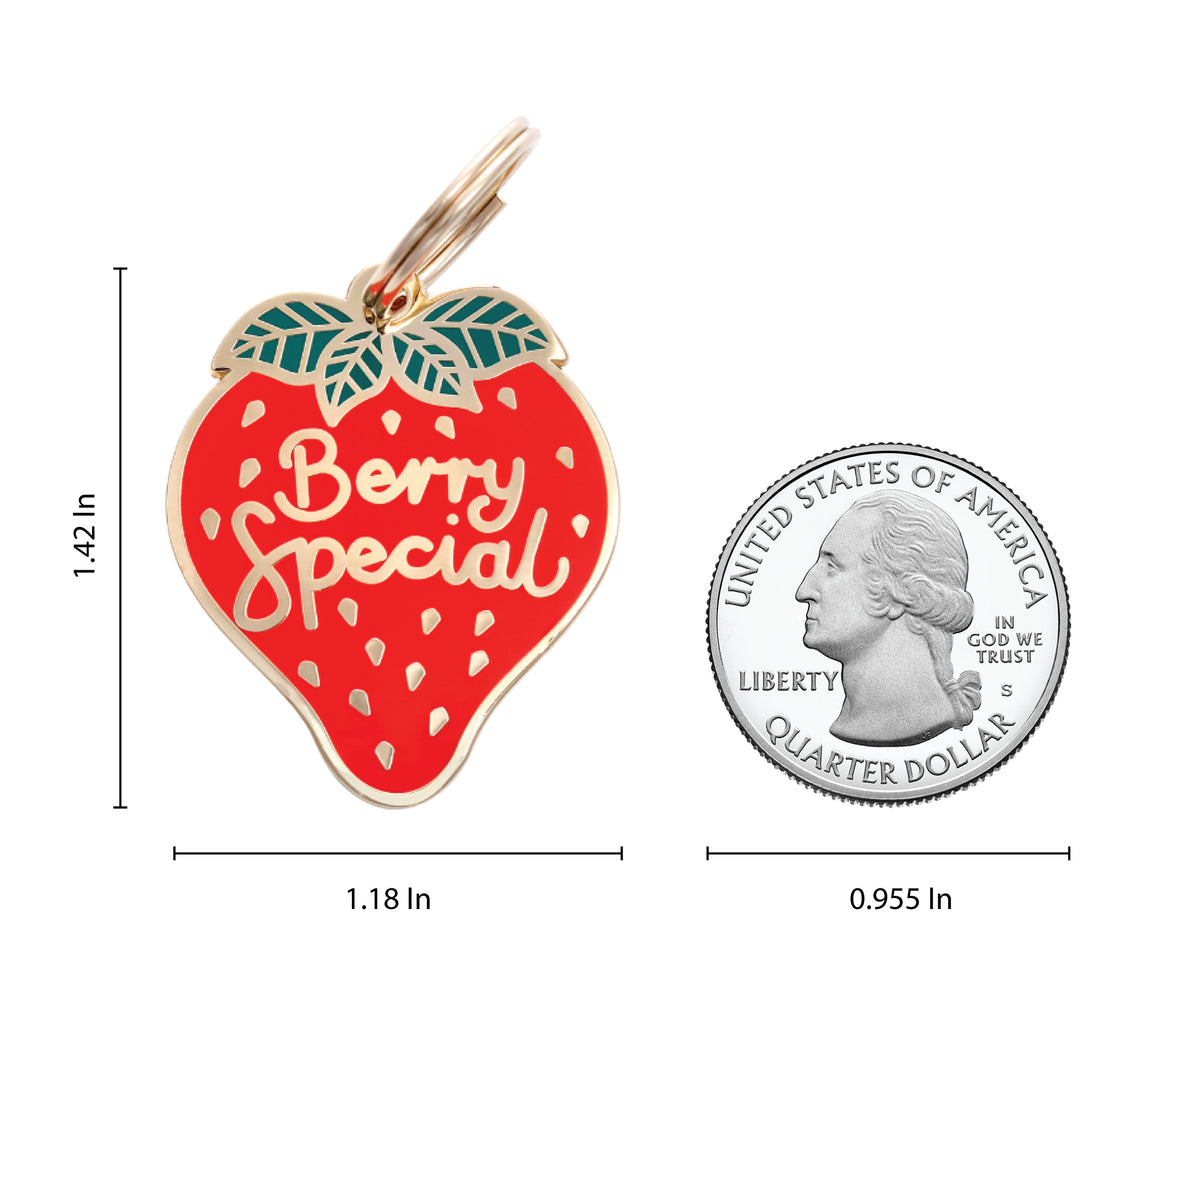 Berry Special Pet ID Tag - 3 Red Rovers